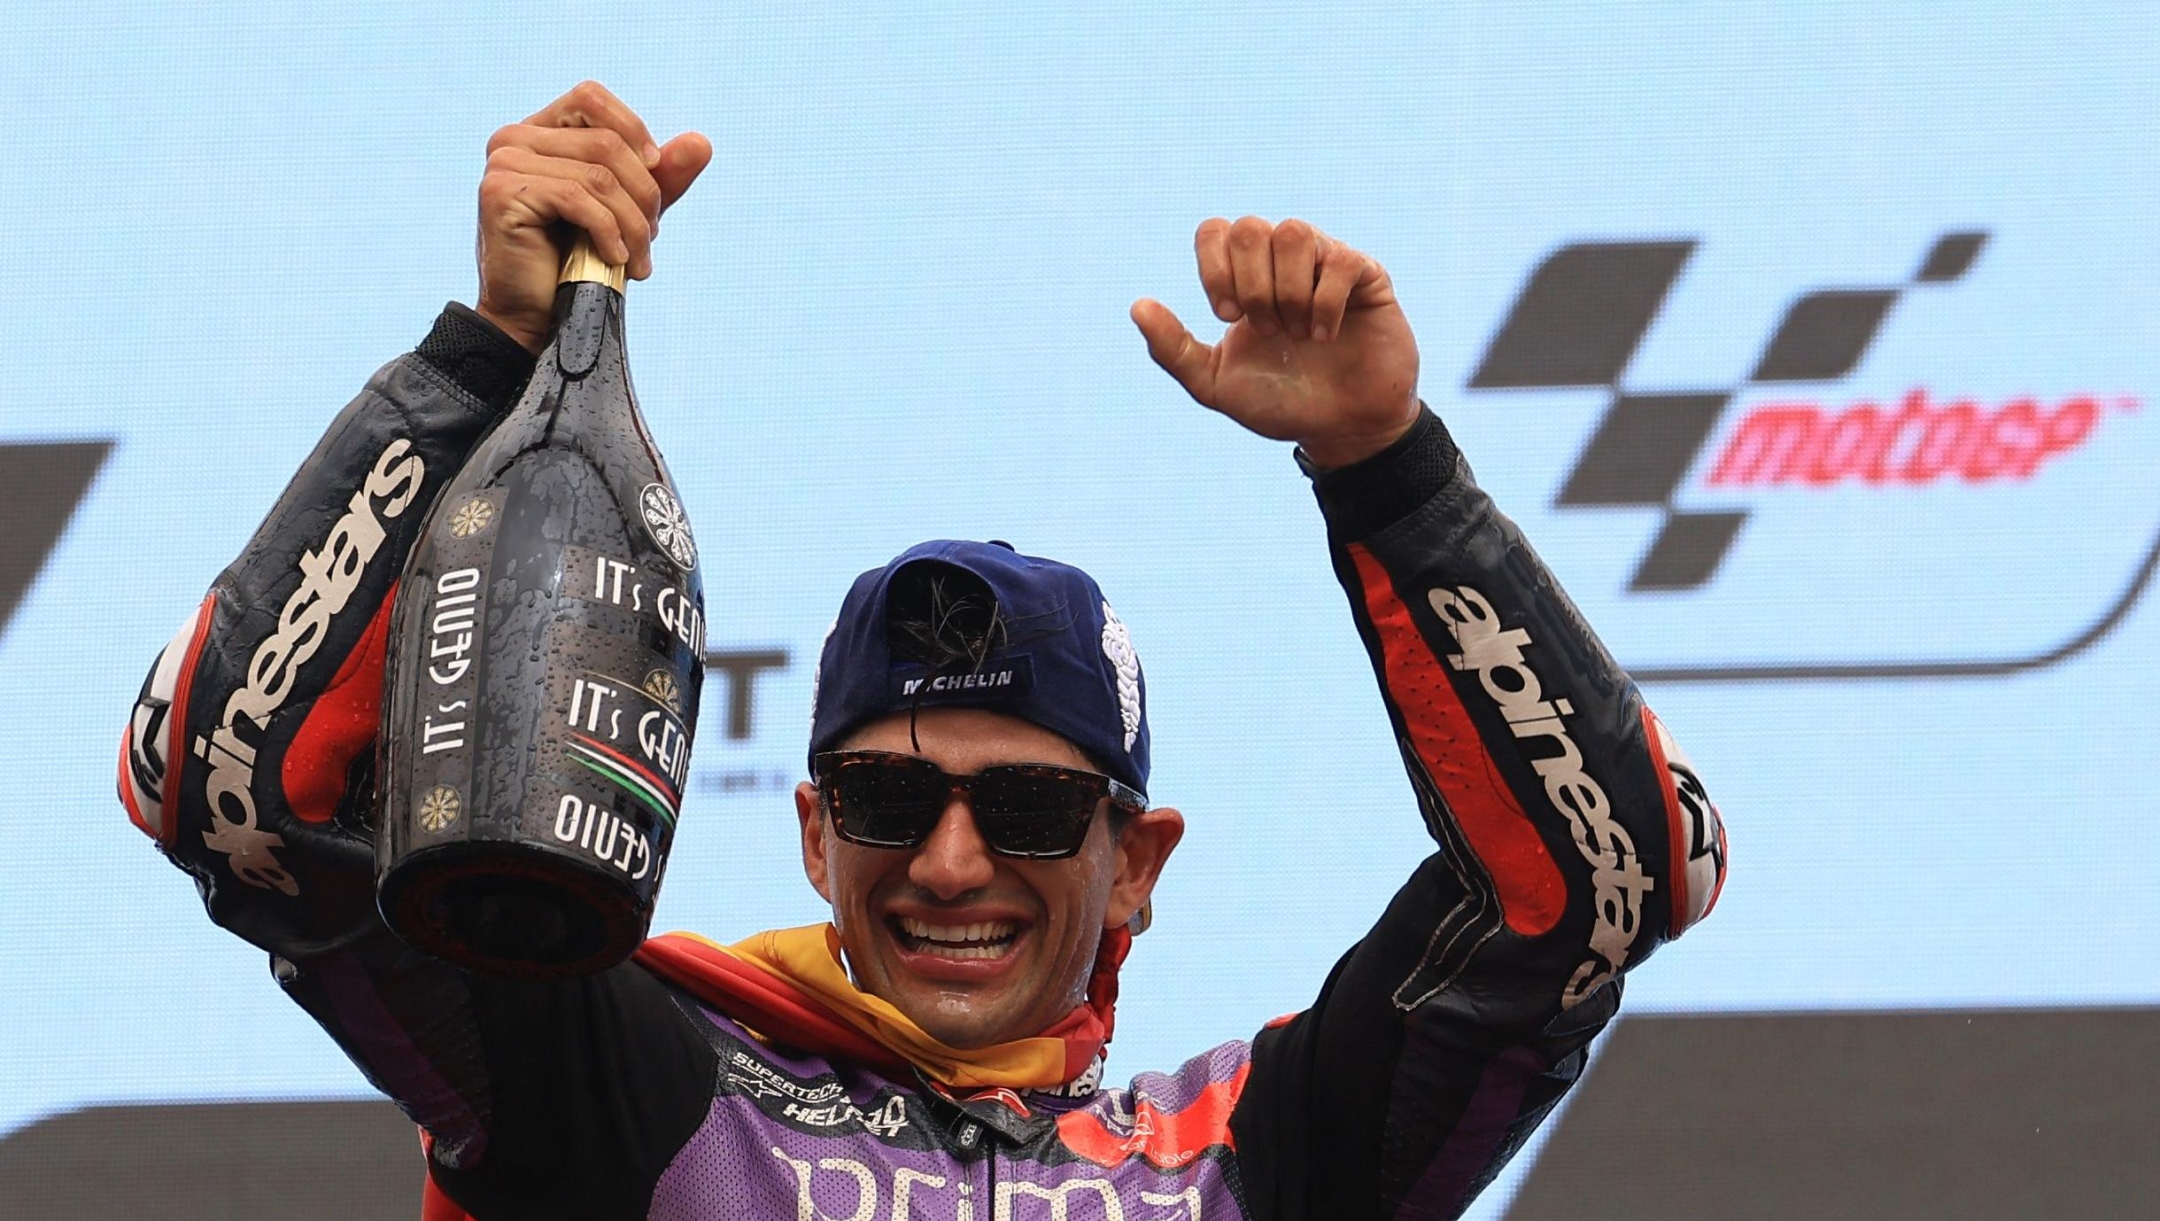 Ducati Spanish rider Jorge Martin celebrates on the podium after winning the MotoGP race of the Portuguese Grand Prix at the Algarve International Circuit in Portimao on March 24, 2024. (Photo by PATRICIA DE MELO MOREIRA / AFP)